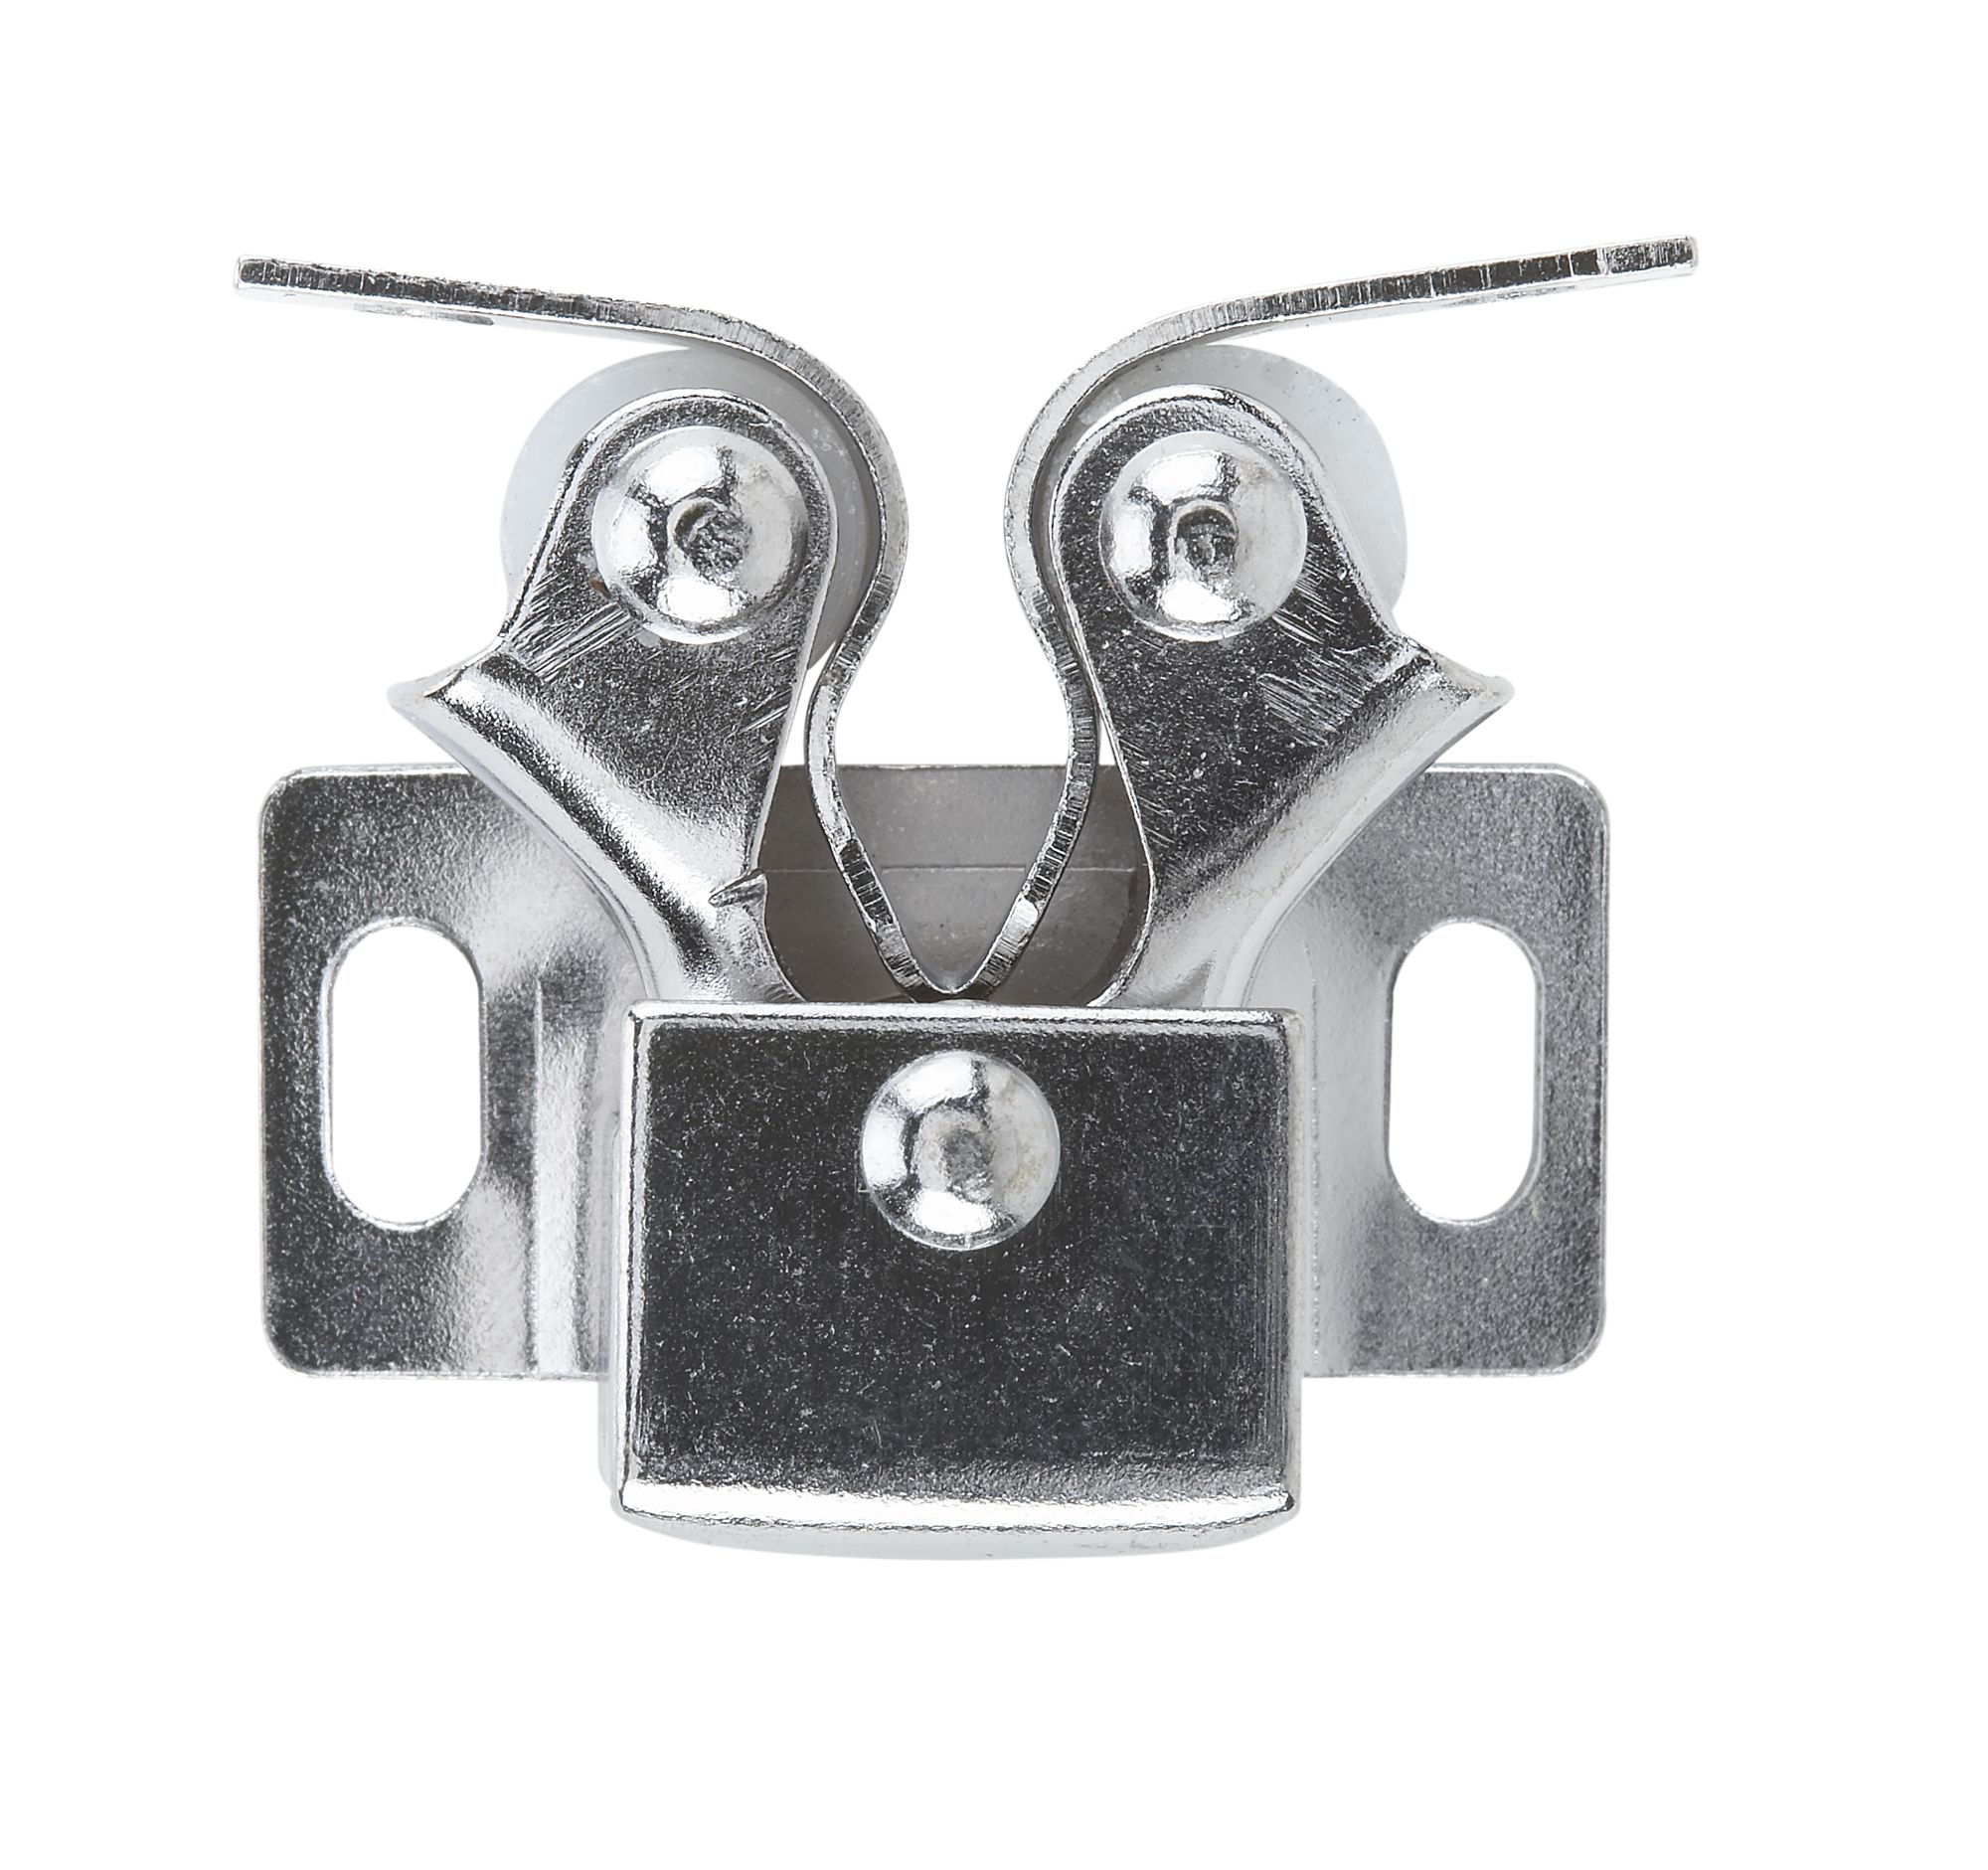 Chrome-plated Carbon steel Double roller catch